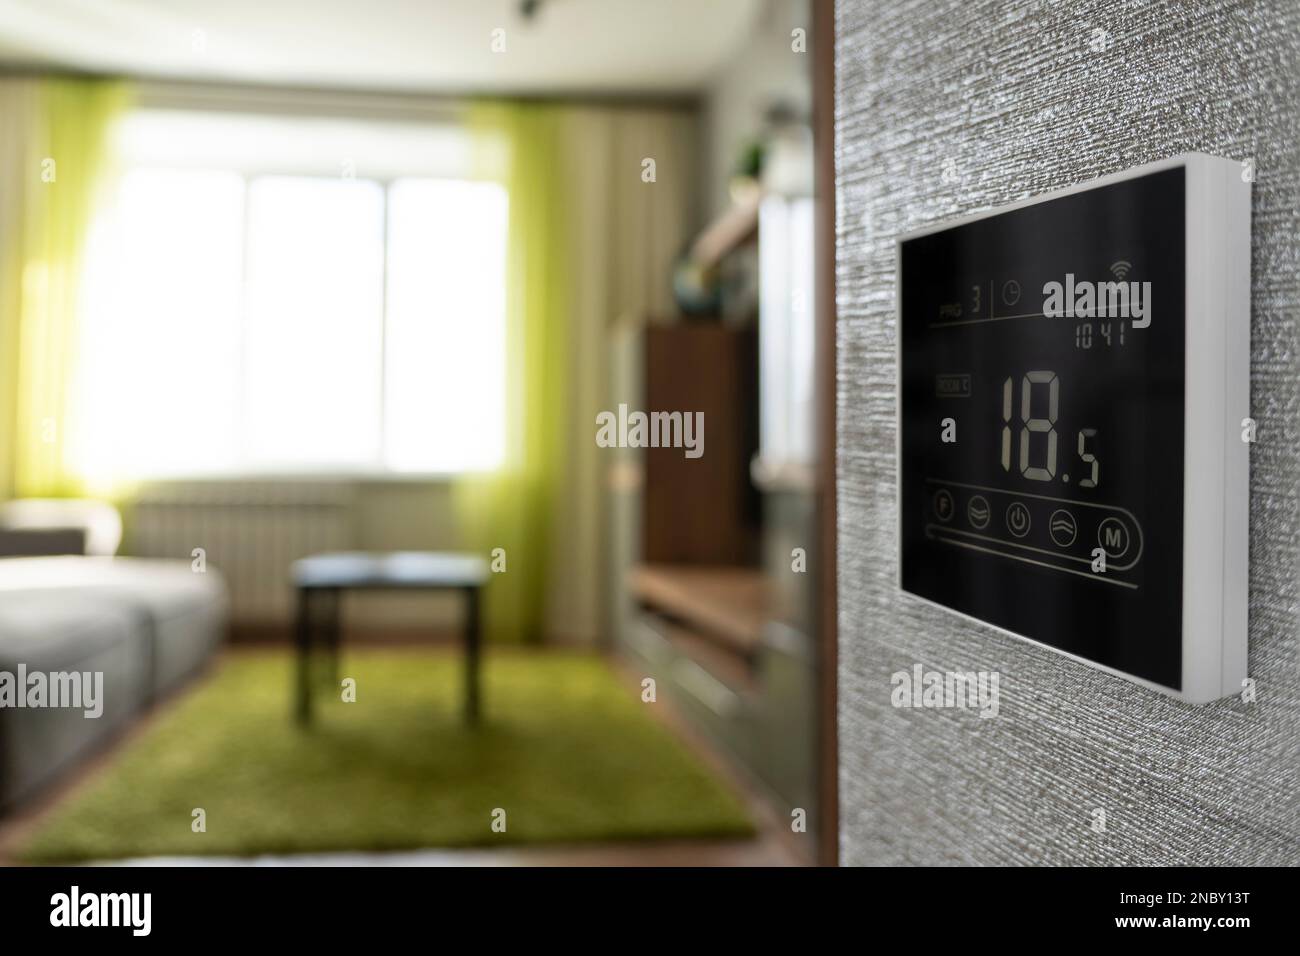 Programmable thermostat for temperature control in home. low temperature in the apartment in winter. 10 degrees Celsius room temperature. electronic t Stock Photo